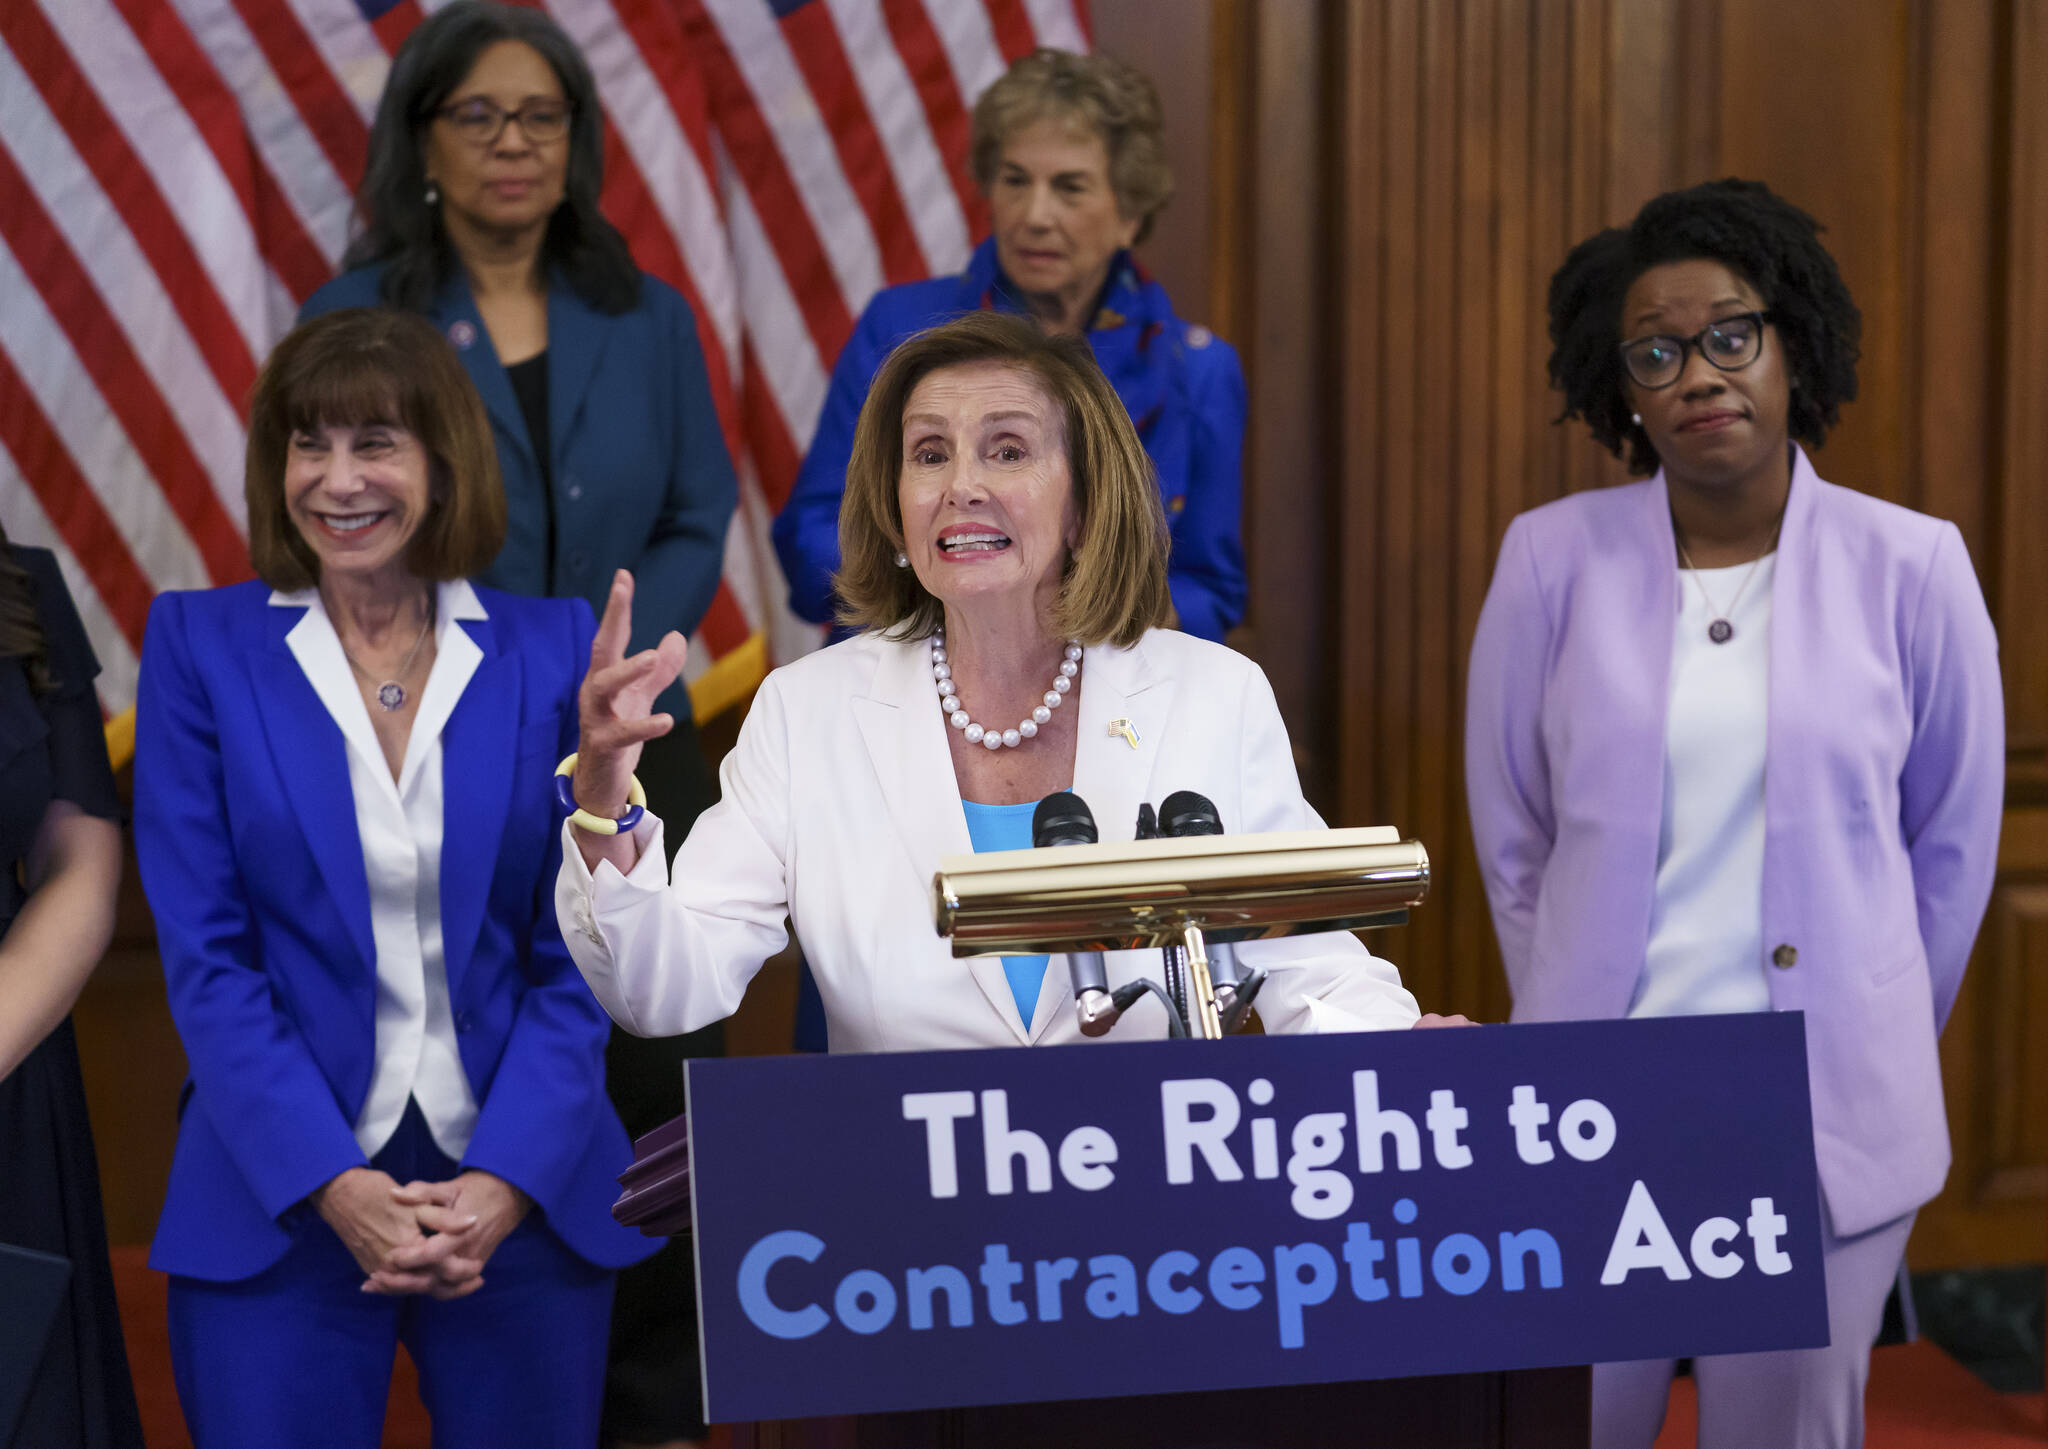 Speaker of the House Nancy Pelosi, D-Calif., makes a point during an event with Democratic women House members and advocates for reproductive freedom ahead of the vote on the Right to Contraception Act, at the Capitol in Washington, Wednesday, July 20, 2022. She is flanked by Rep. Kathy Manning, D-N.C., and Rep. Lauren Underwood, D-Ill. Democrats are pushing legislation through the House that would inscribe the right to use contraceptives into law. (AP Photo/J. Scott Applewhite)